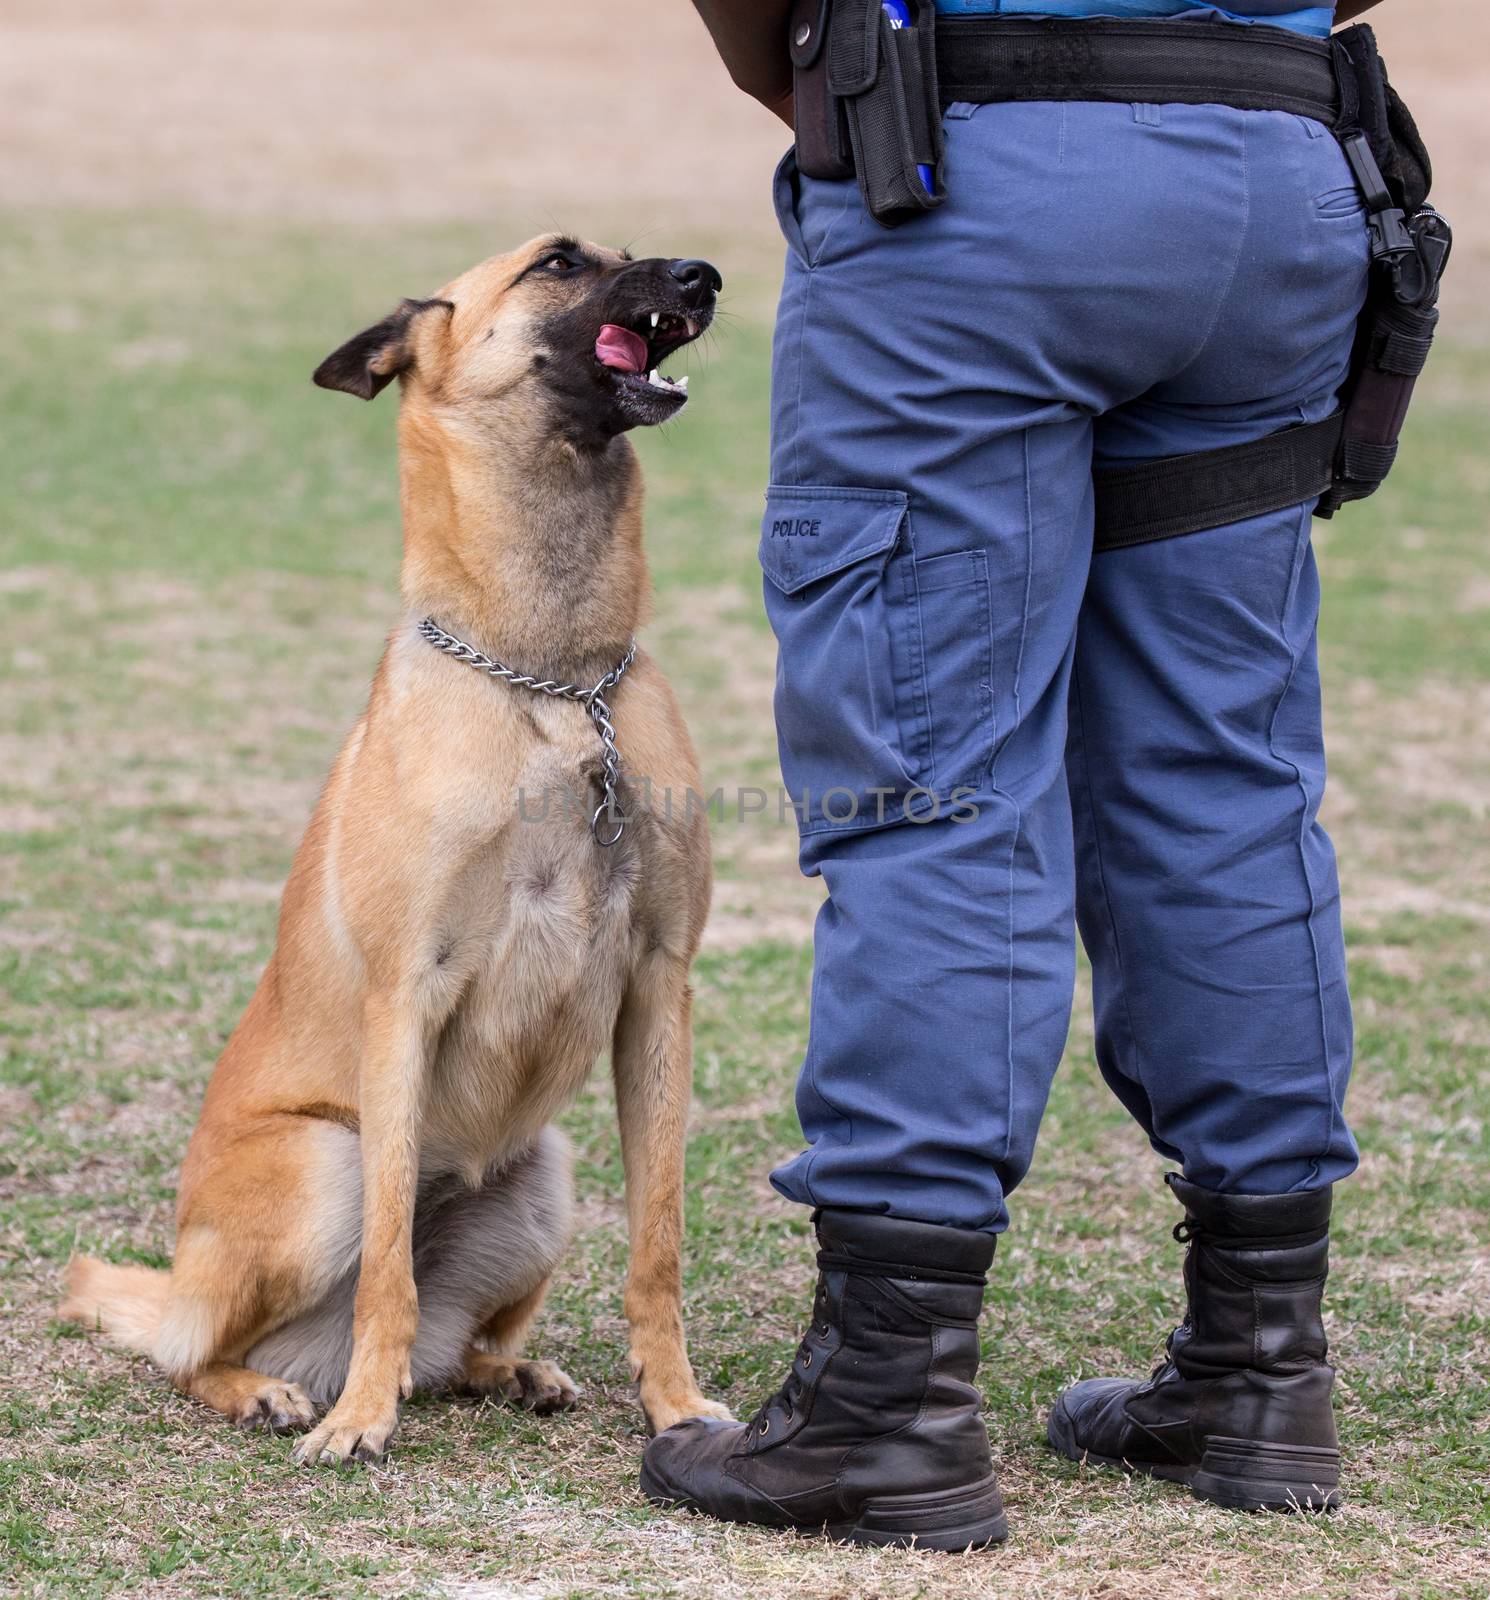 Obedient police dog sitting at his handlers feet